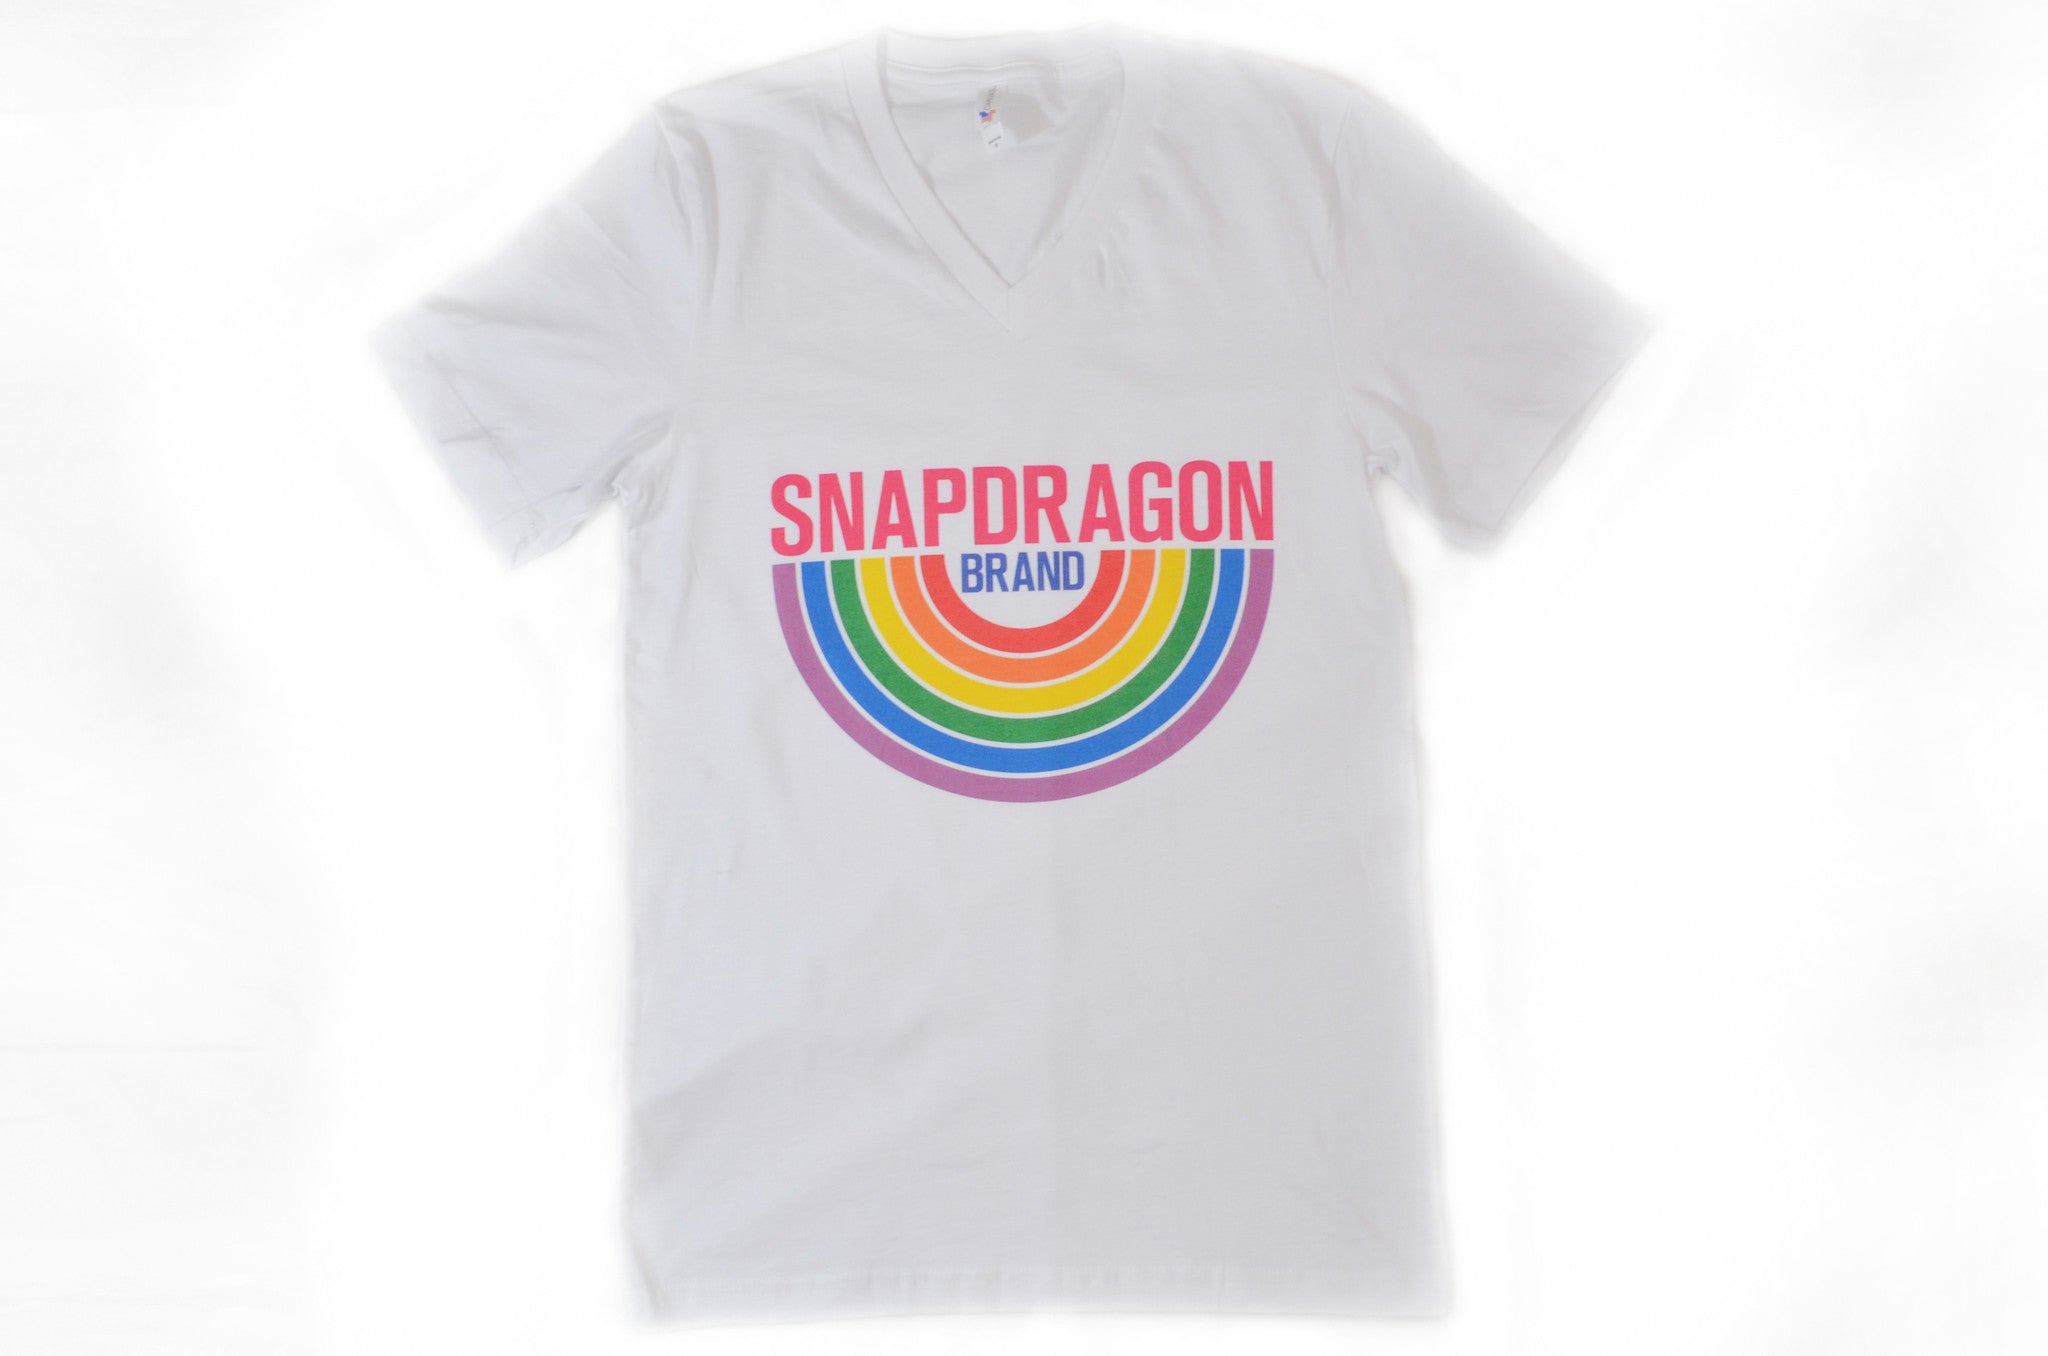 Snapdragon Brand Clothing Granny Square Crochet Print unisex rainbow v-neck tee t-shirt in style logo features a vintage psychedelic boho feel and a rainbow of colors. Made of comfortable cotton. lgbt lgbtq lgbtqi